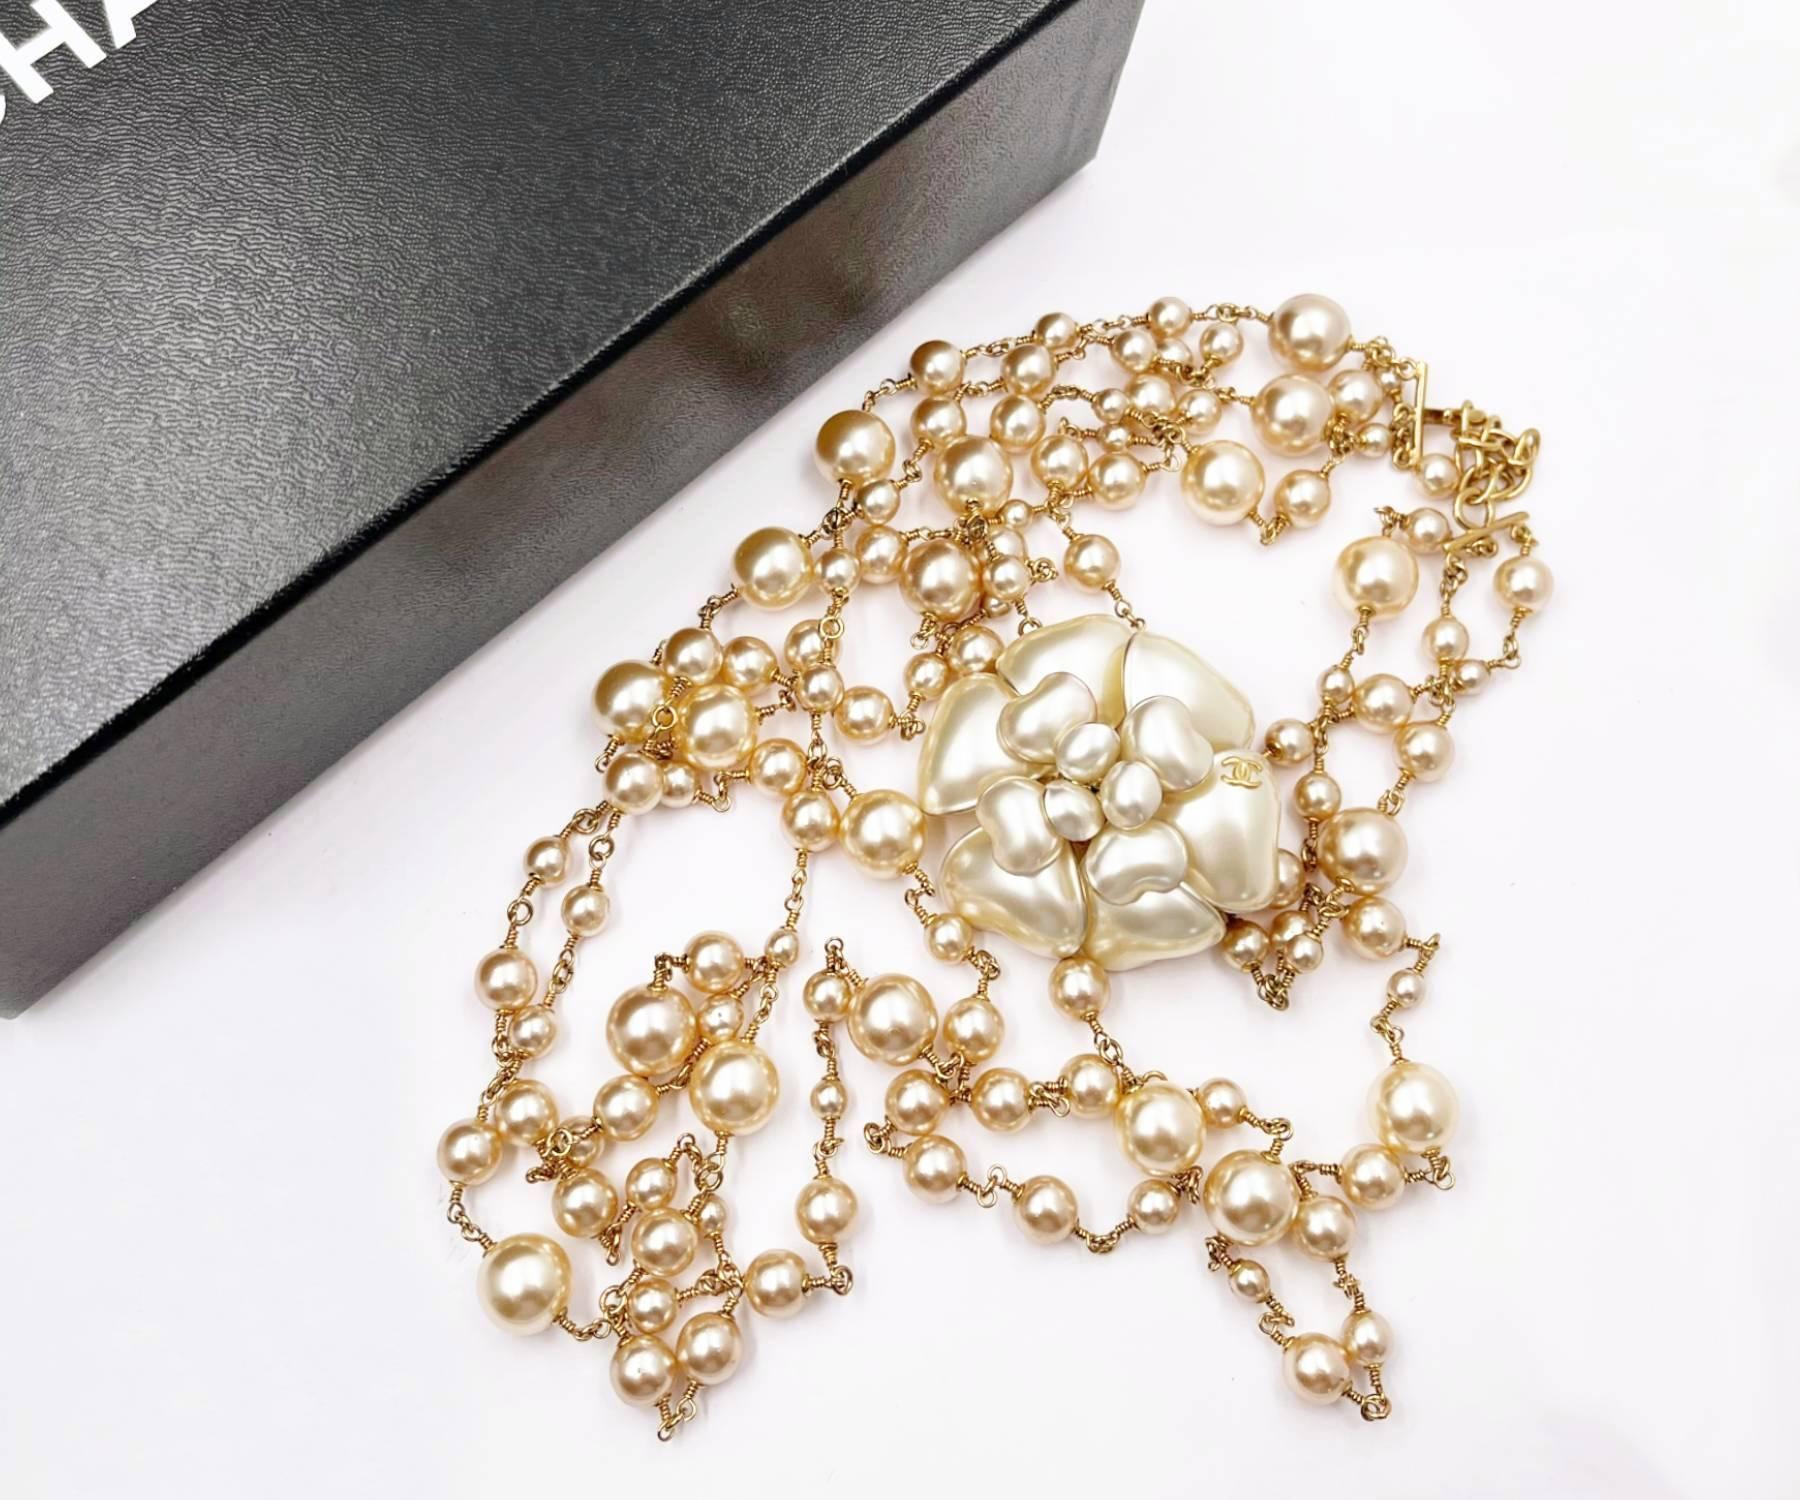 Chanel Super Rare Gold CC Pearl Camellia Super Long Choker Evening Pearl Necklace

*Stamp is marked 02. It is a year of 2002 design.
*Made in France
*Comes with original box

-It is approximately 13.5″ to extended 16″ total choker length.
-It is